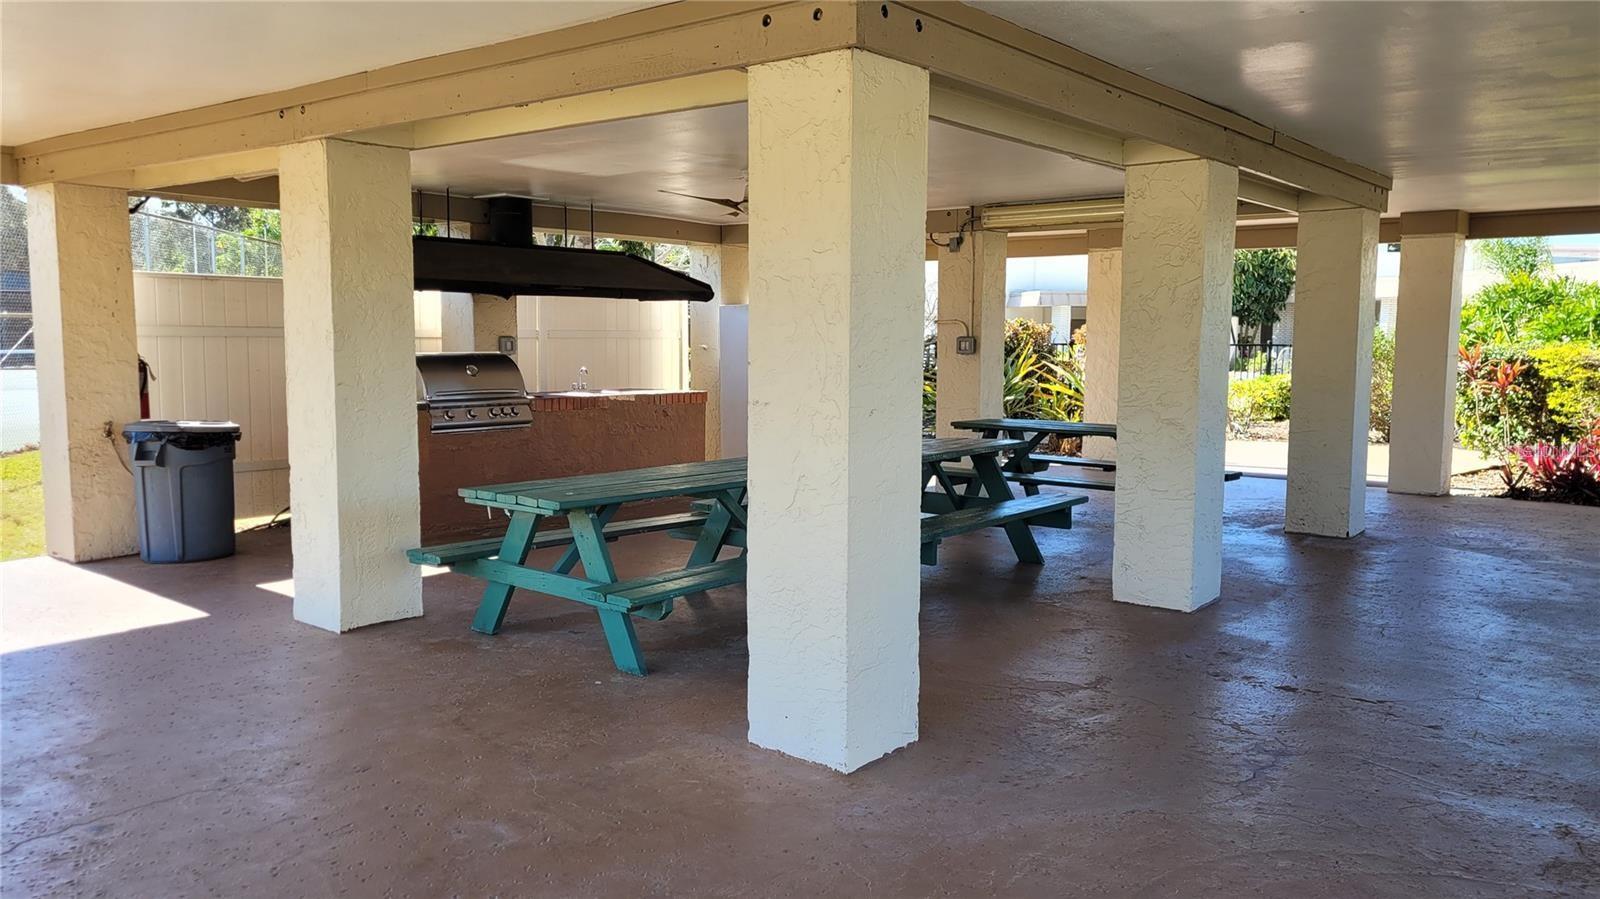 Outdoor kitchen and picnic area